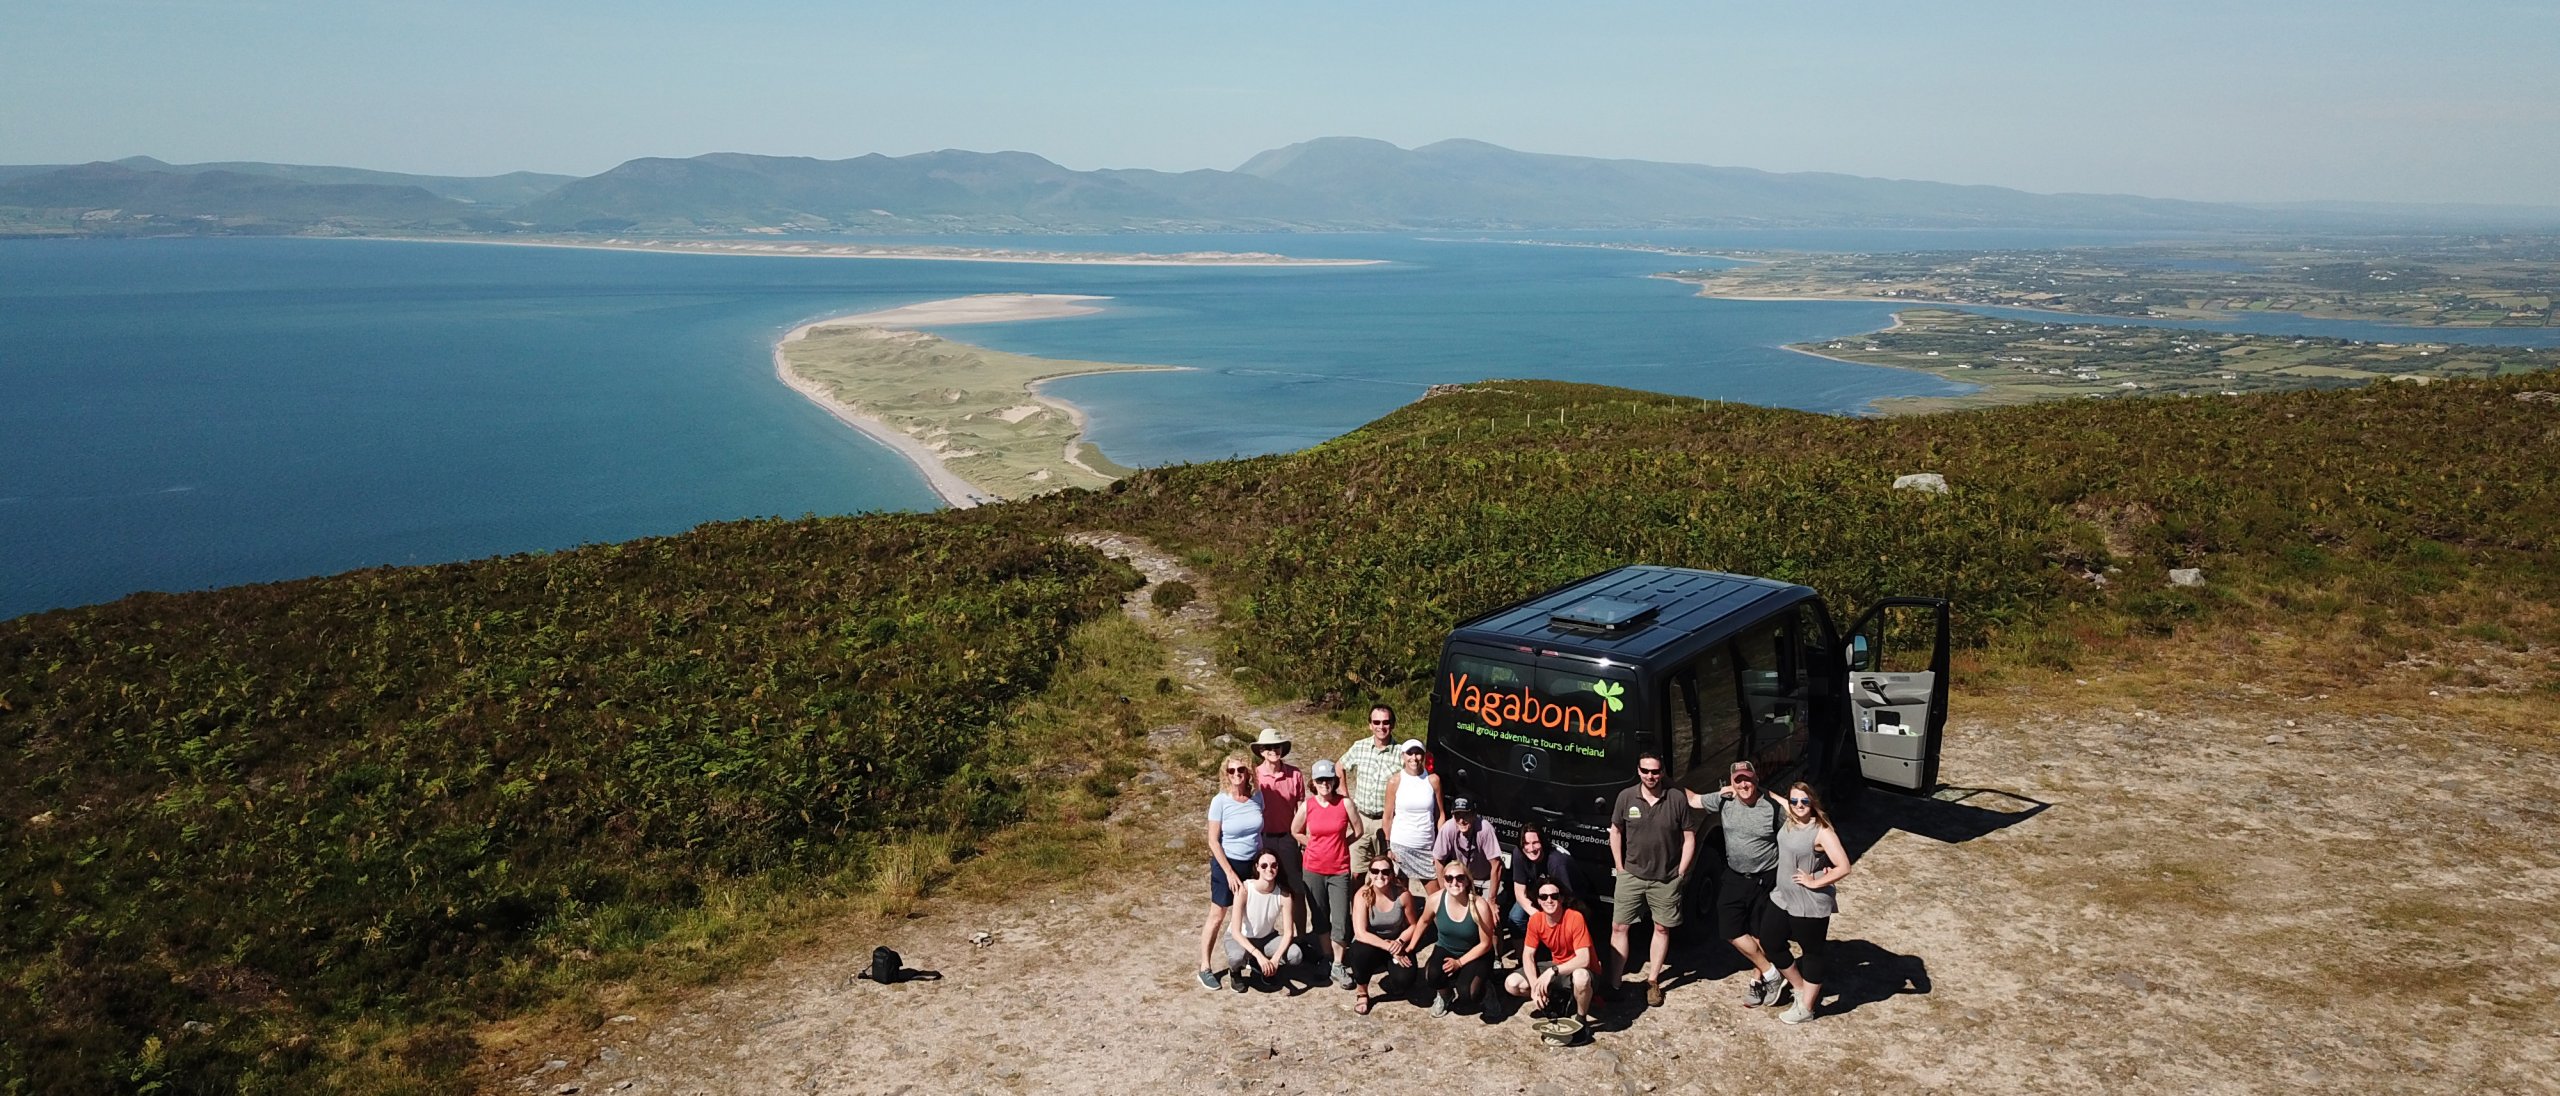 Vagabond VagaTron Tour Vehicle and group posing at Rossbeigh in Kerry